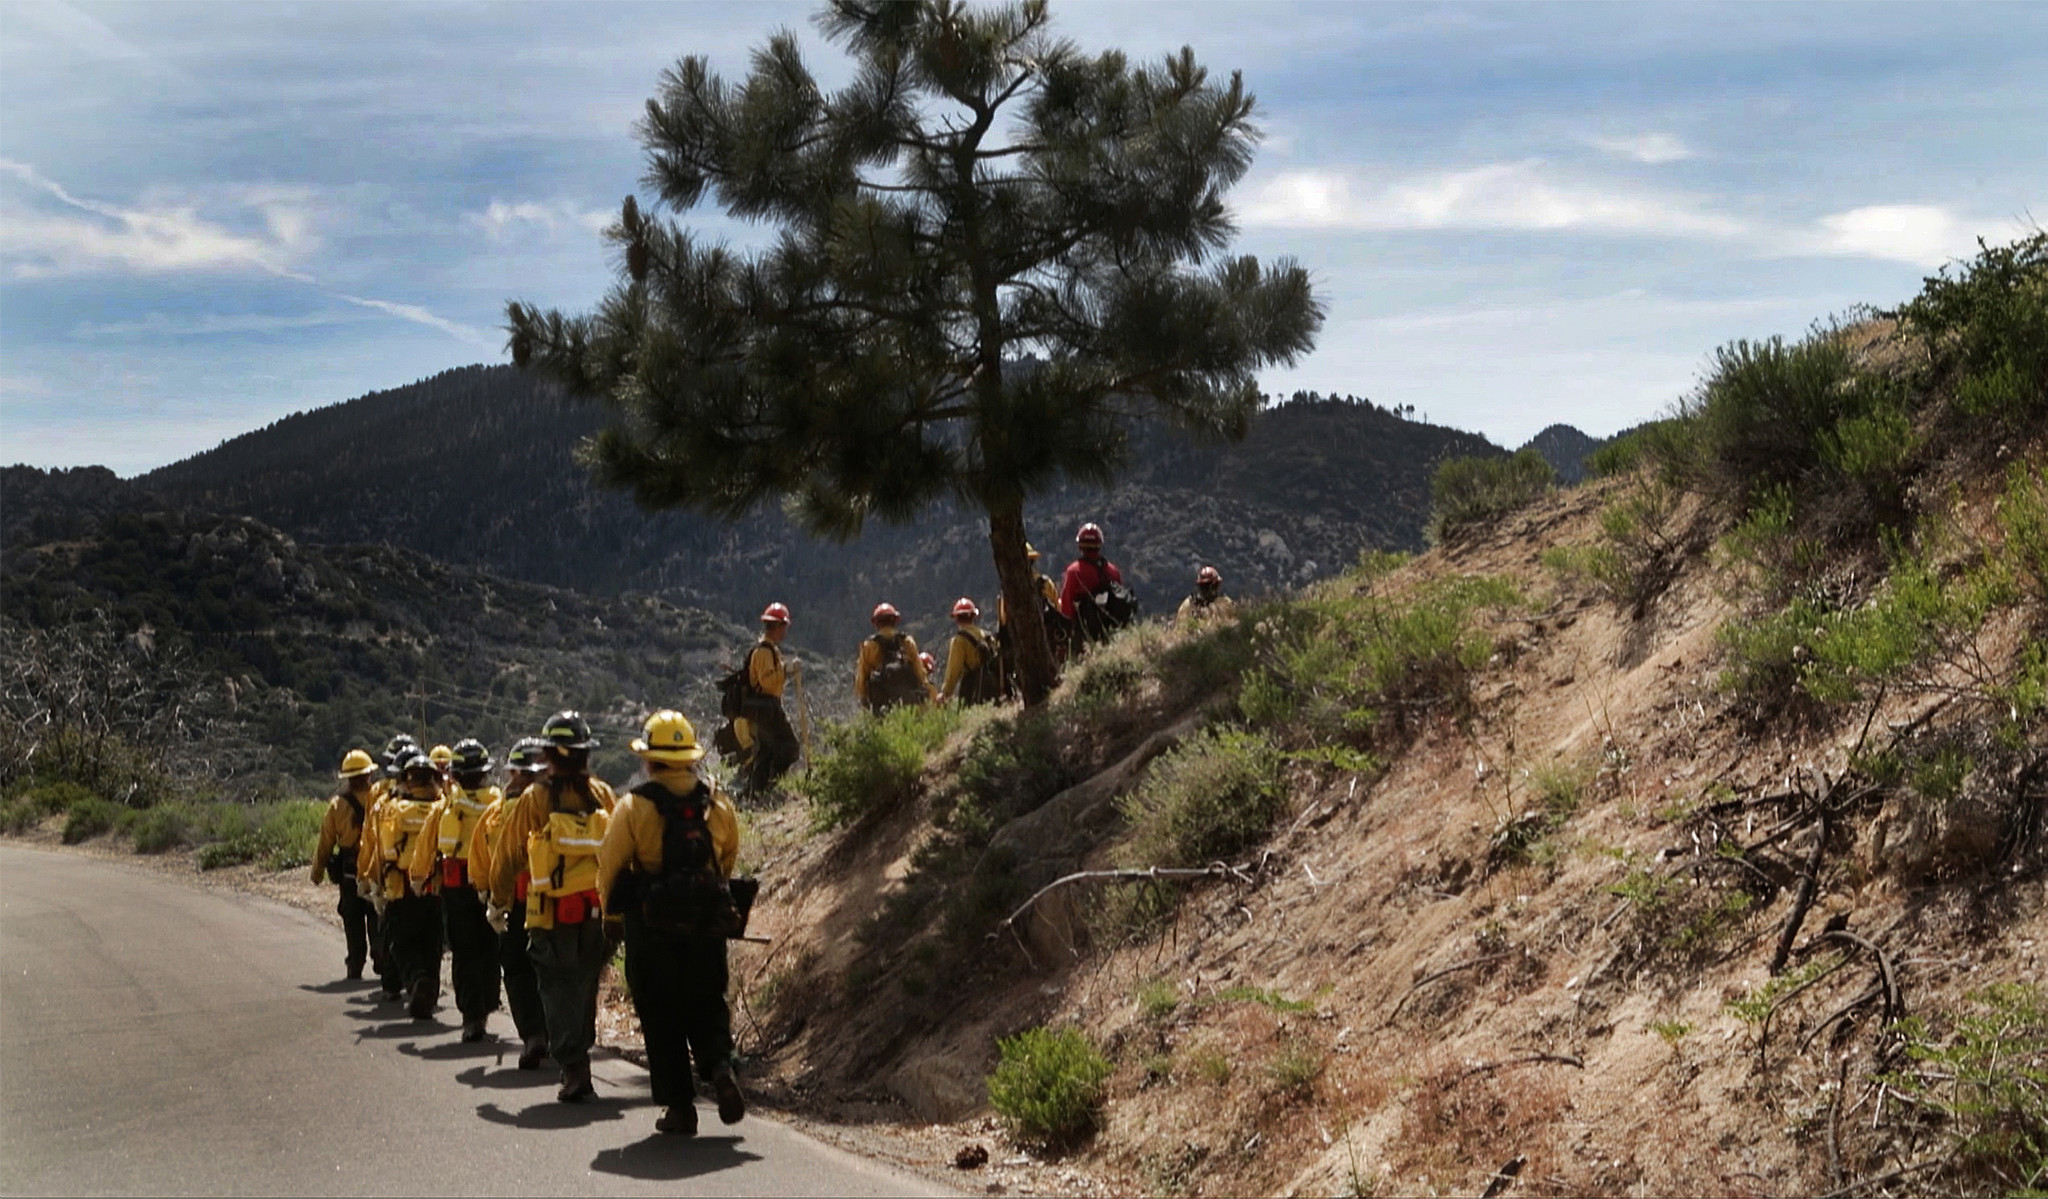 The group gathers for the class’ last drill, designed to simulate fully containing a fire on a brush-choked hillside.